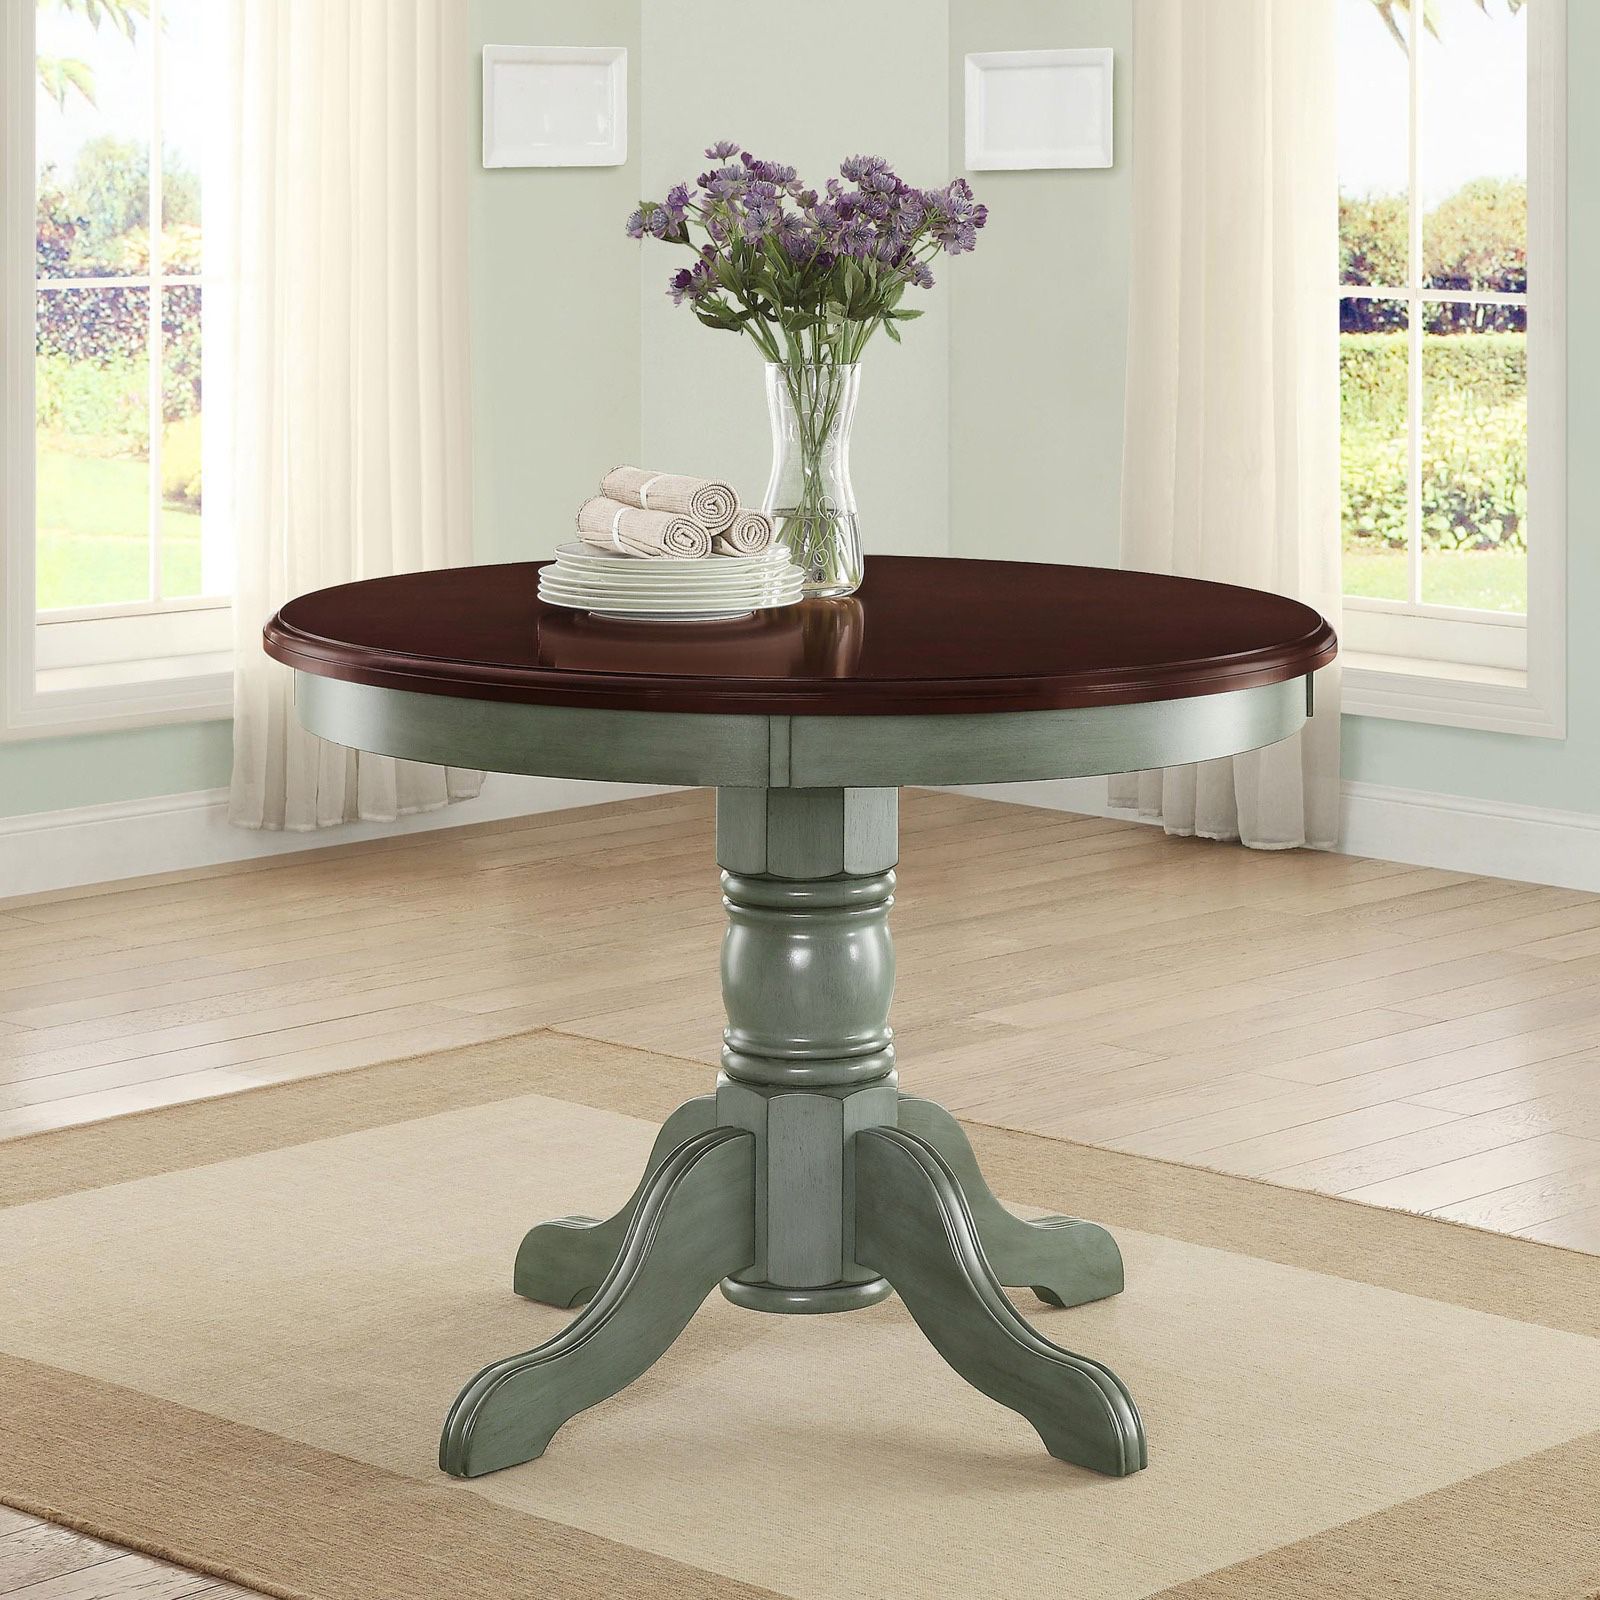 New Better Homes and Gardens Cambridge Place Dining Table